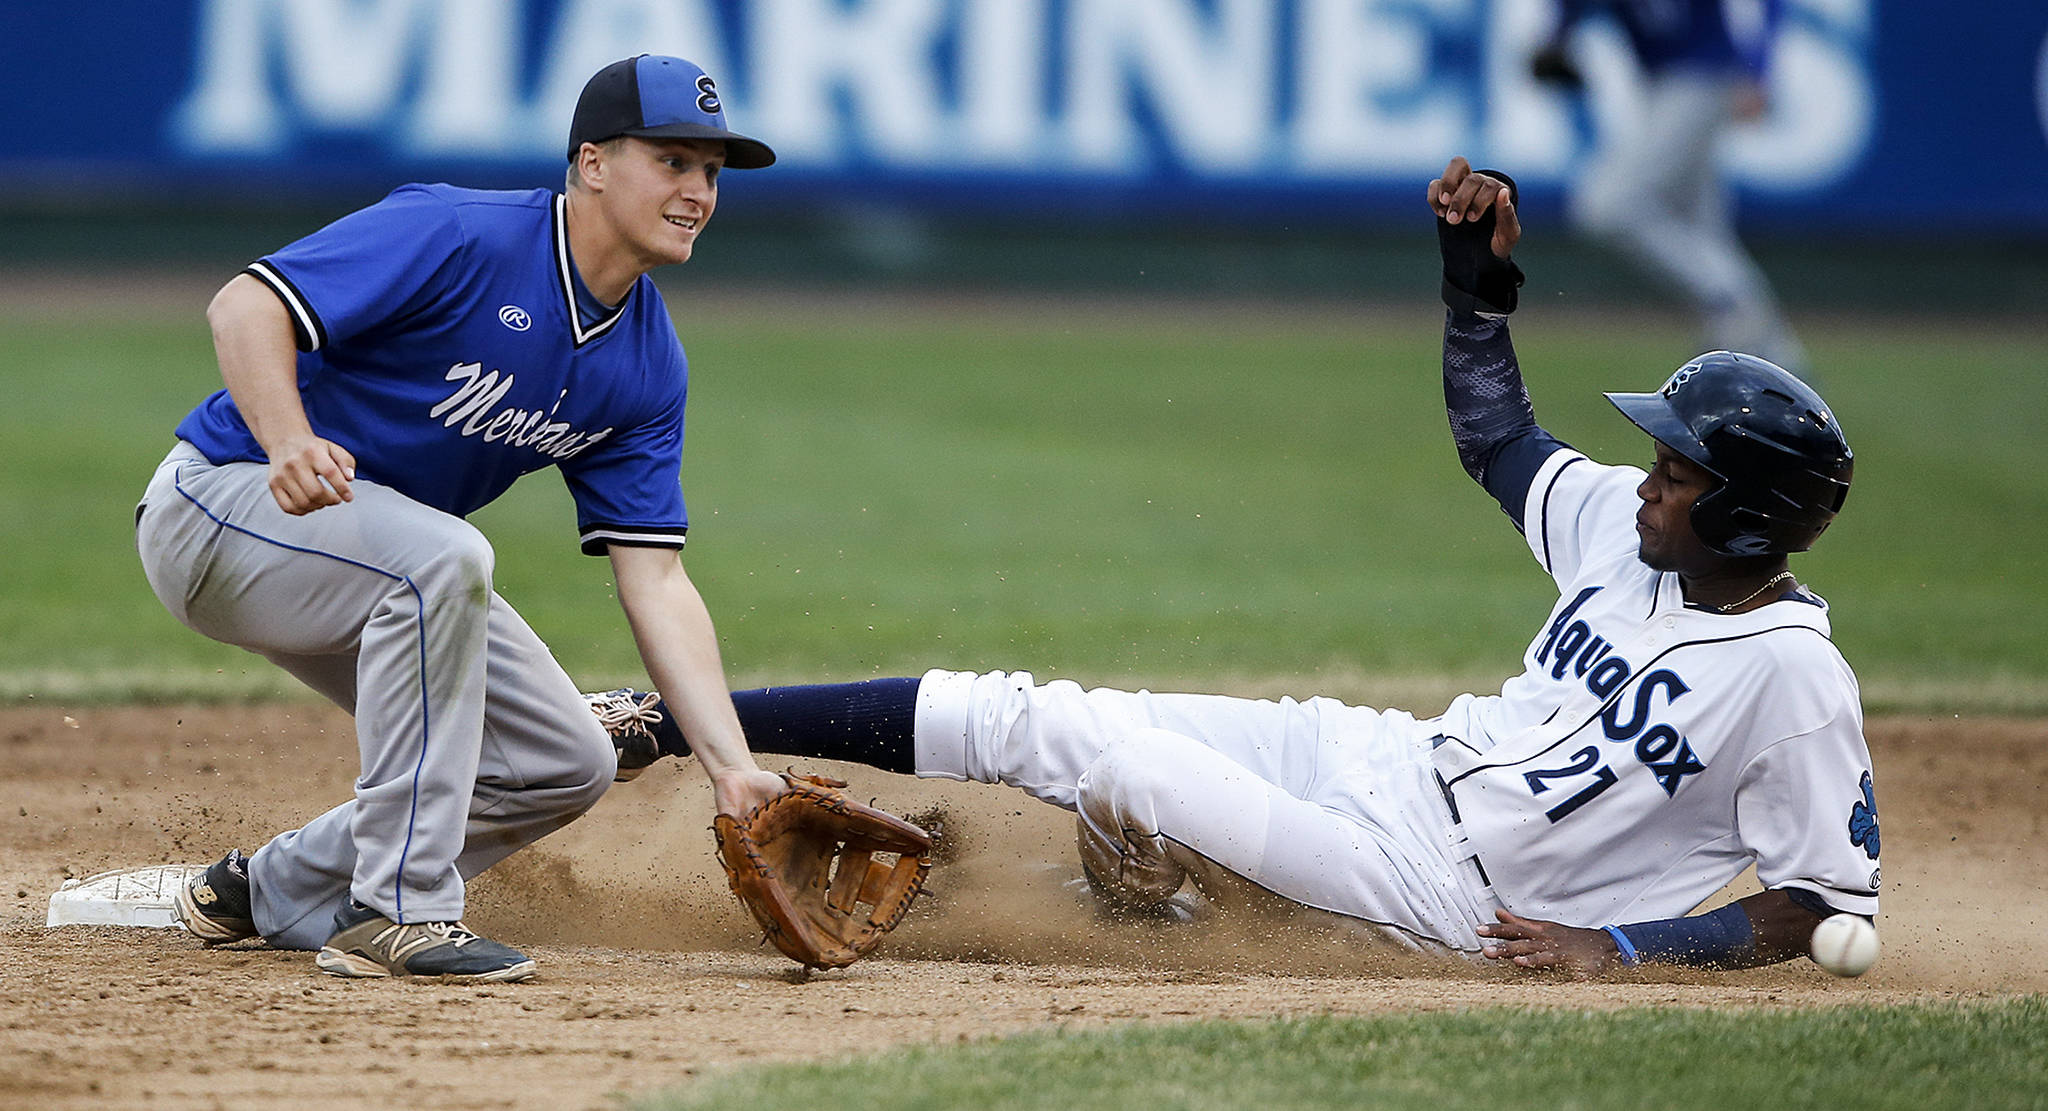 Aquasox runner Osmy Gregorio (right) slides safely into second base as Merchants second baseman Kevin Olmstead watches the ball during the Everett Cup exhibition game on June 13, 2017, at Everett Memorial Stadium. (Ian Terry / The Herald)